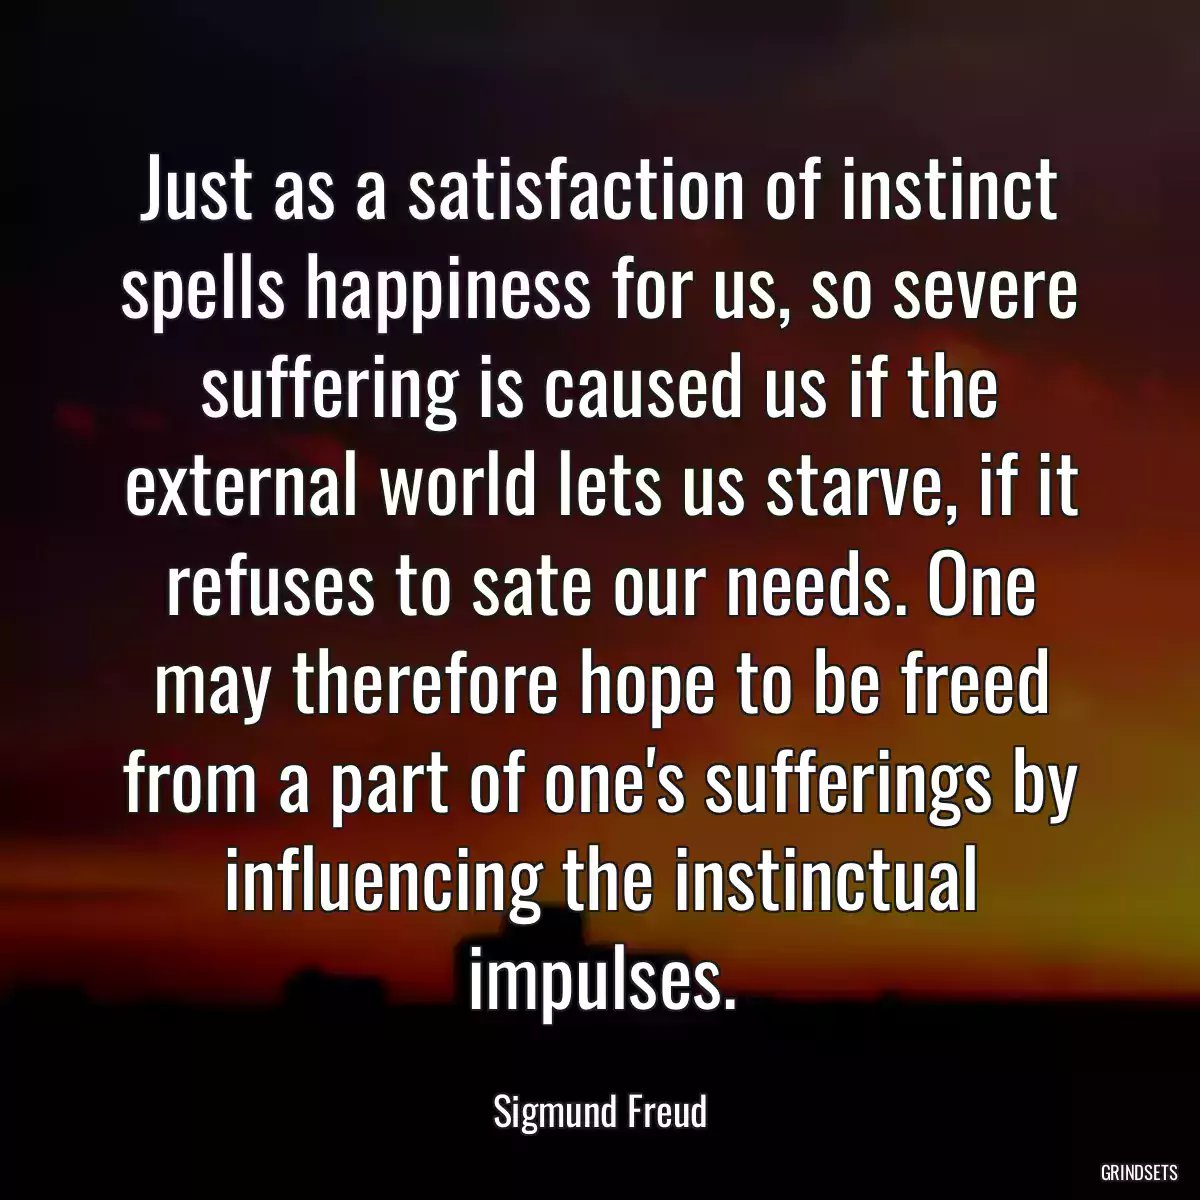 Just as a satisfaction of instinct spells happiness for us, so severe suffering is caused us if the external world lets us starve, if it refuses to sate our needs. One may therefore hope to be freed from a part of one\'s sufferings by influencing the instinctual impulses.